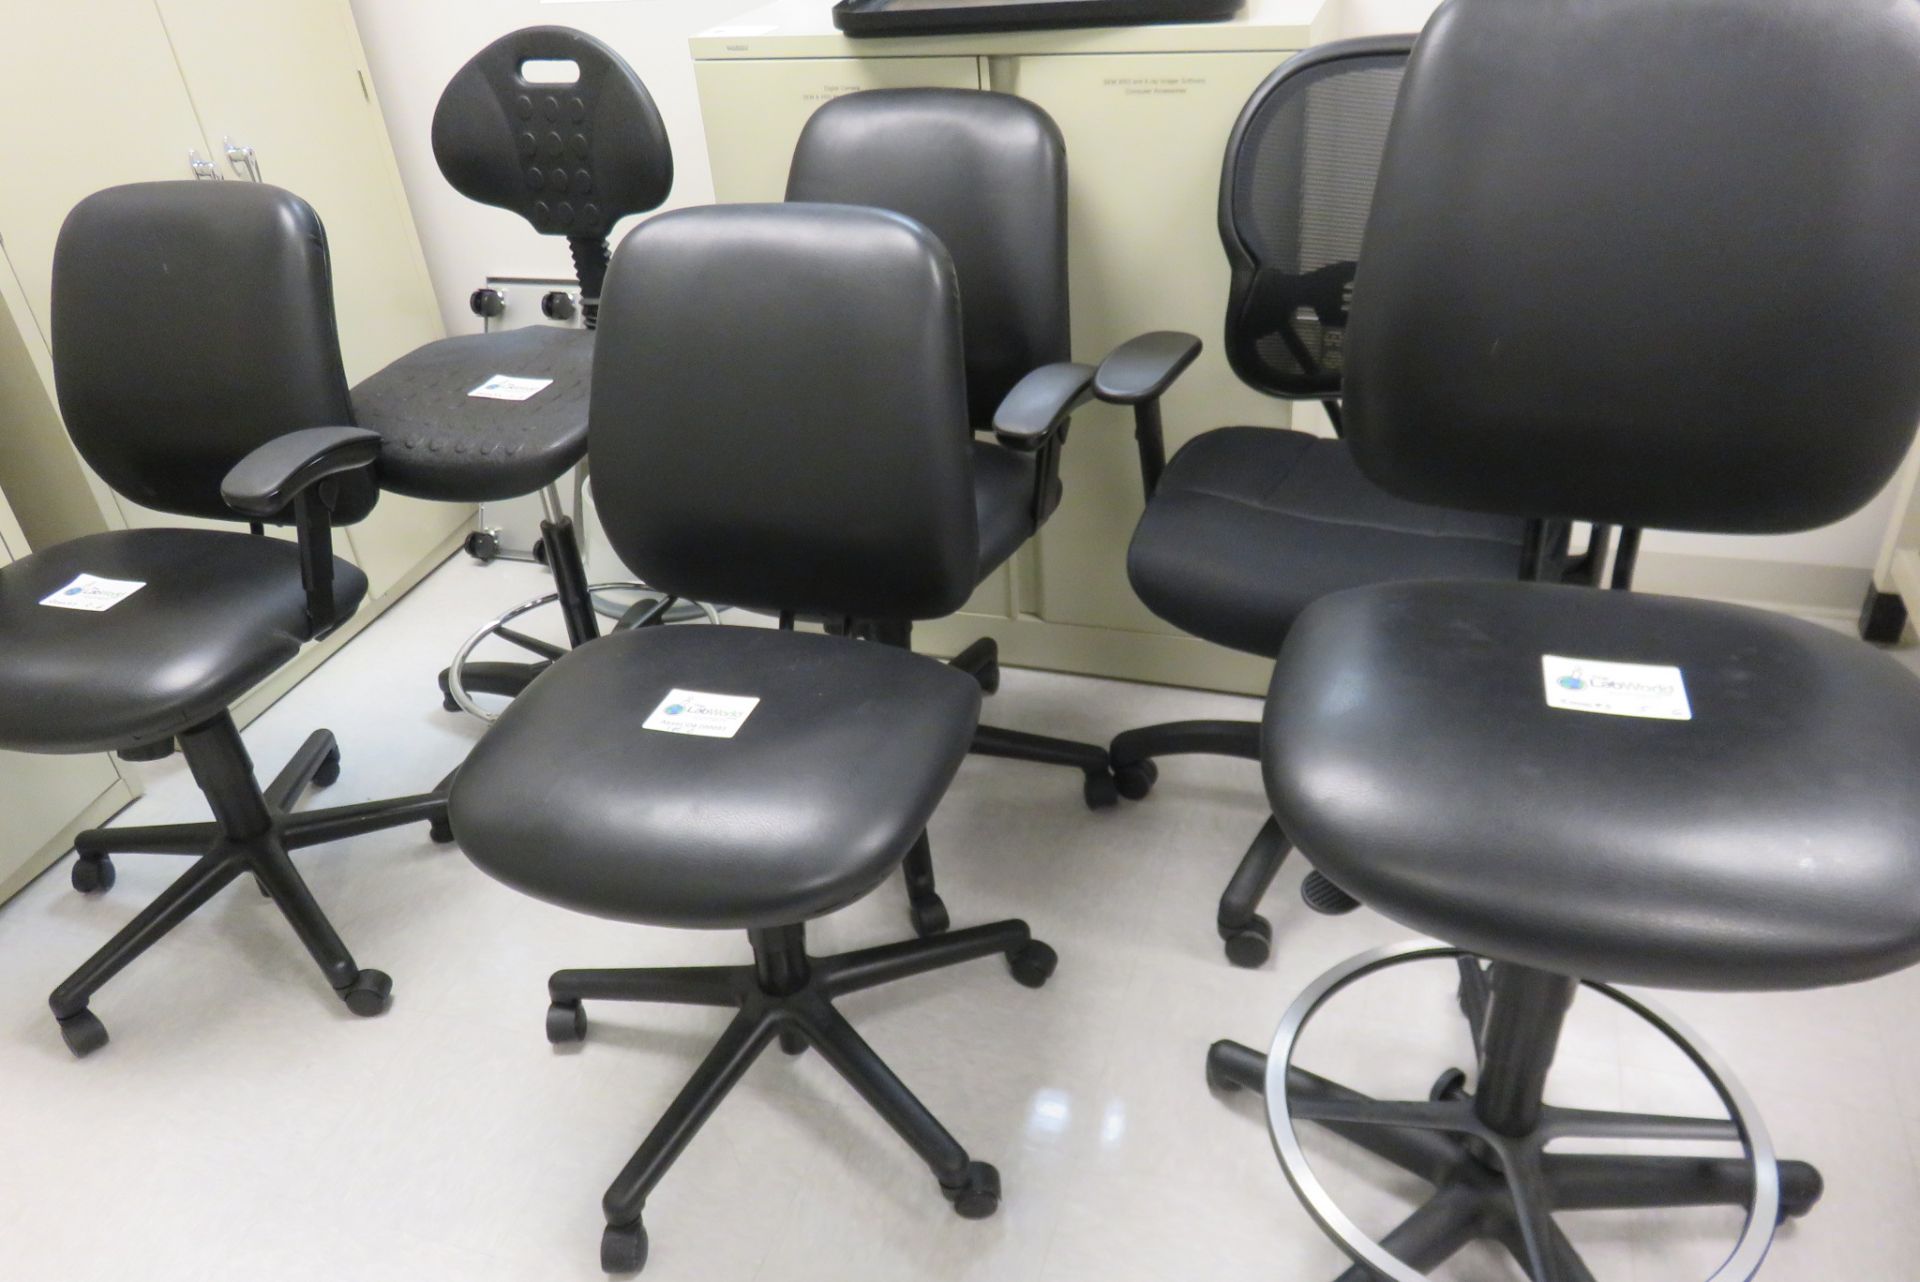 Lab Chairs Lot of (6) Lab and desk chairs